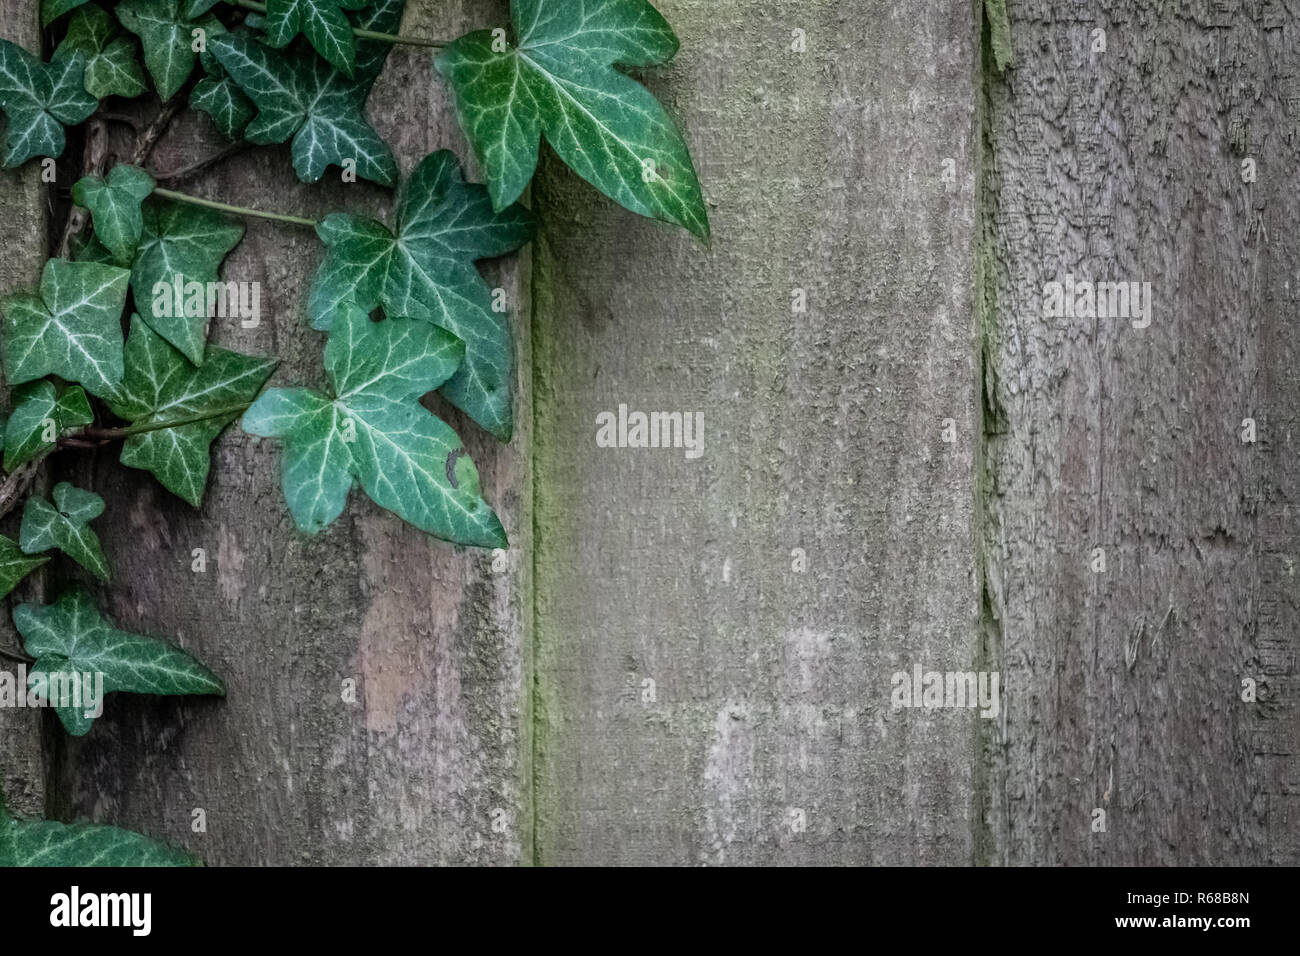 Green ivy on wooden fence wall Stock Photo